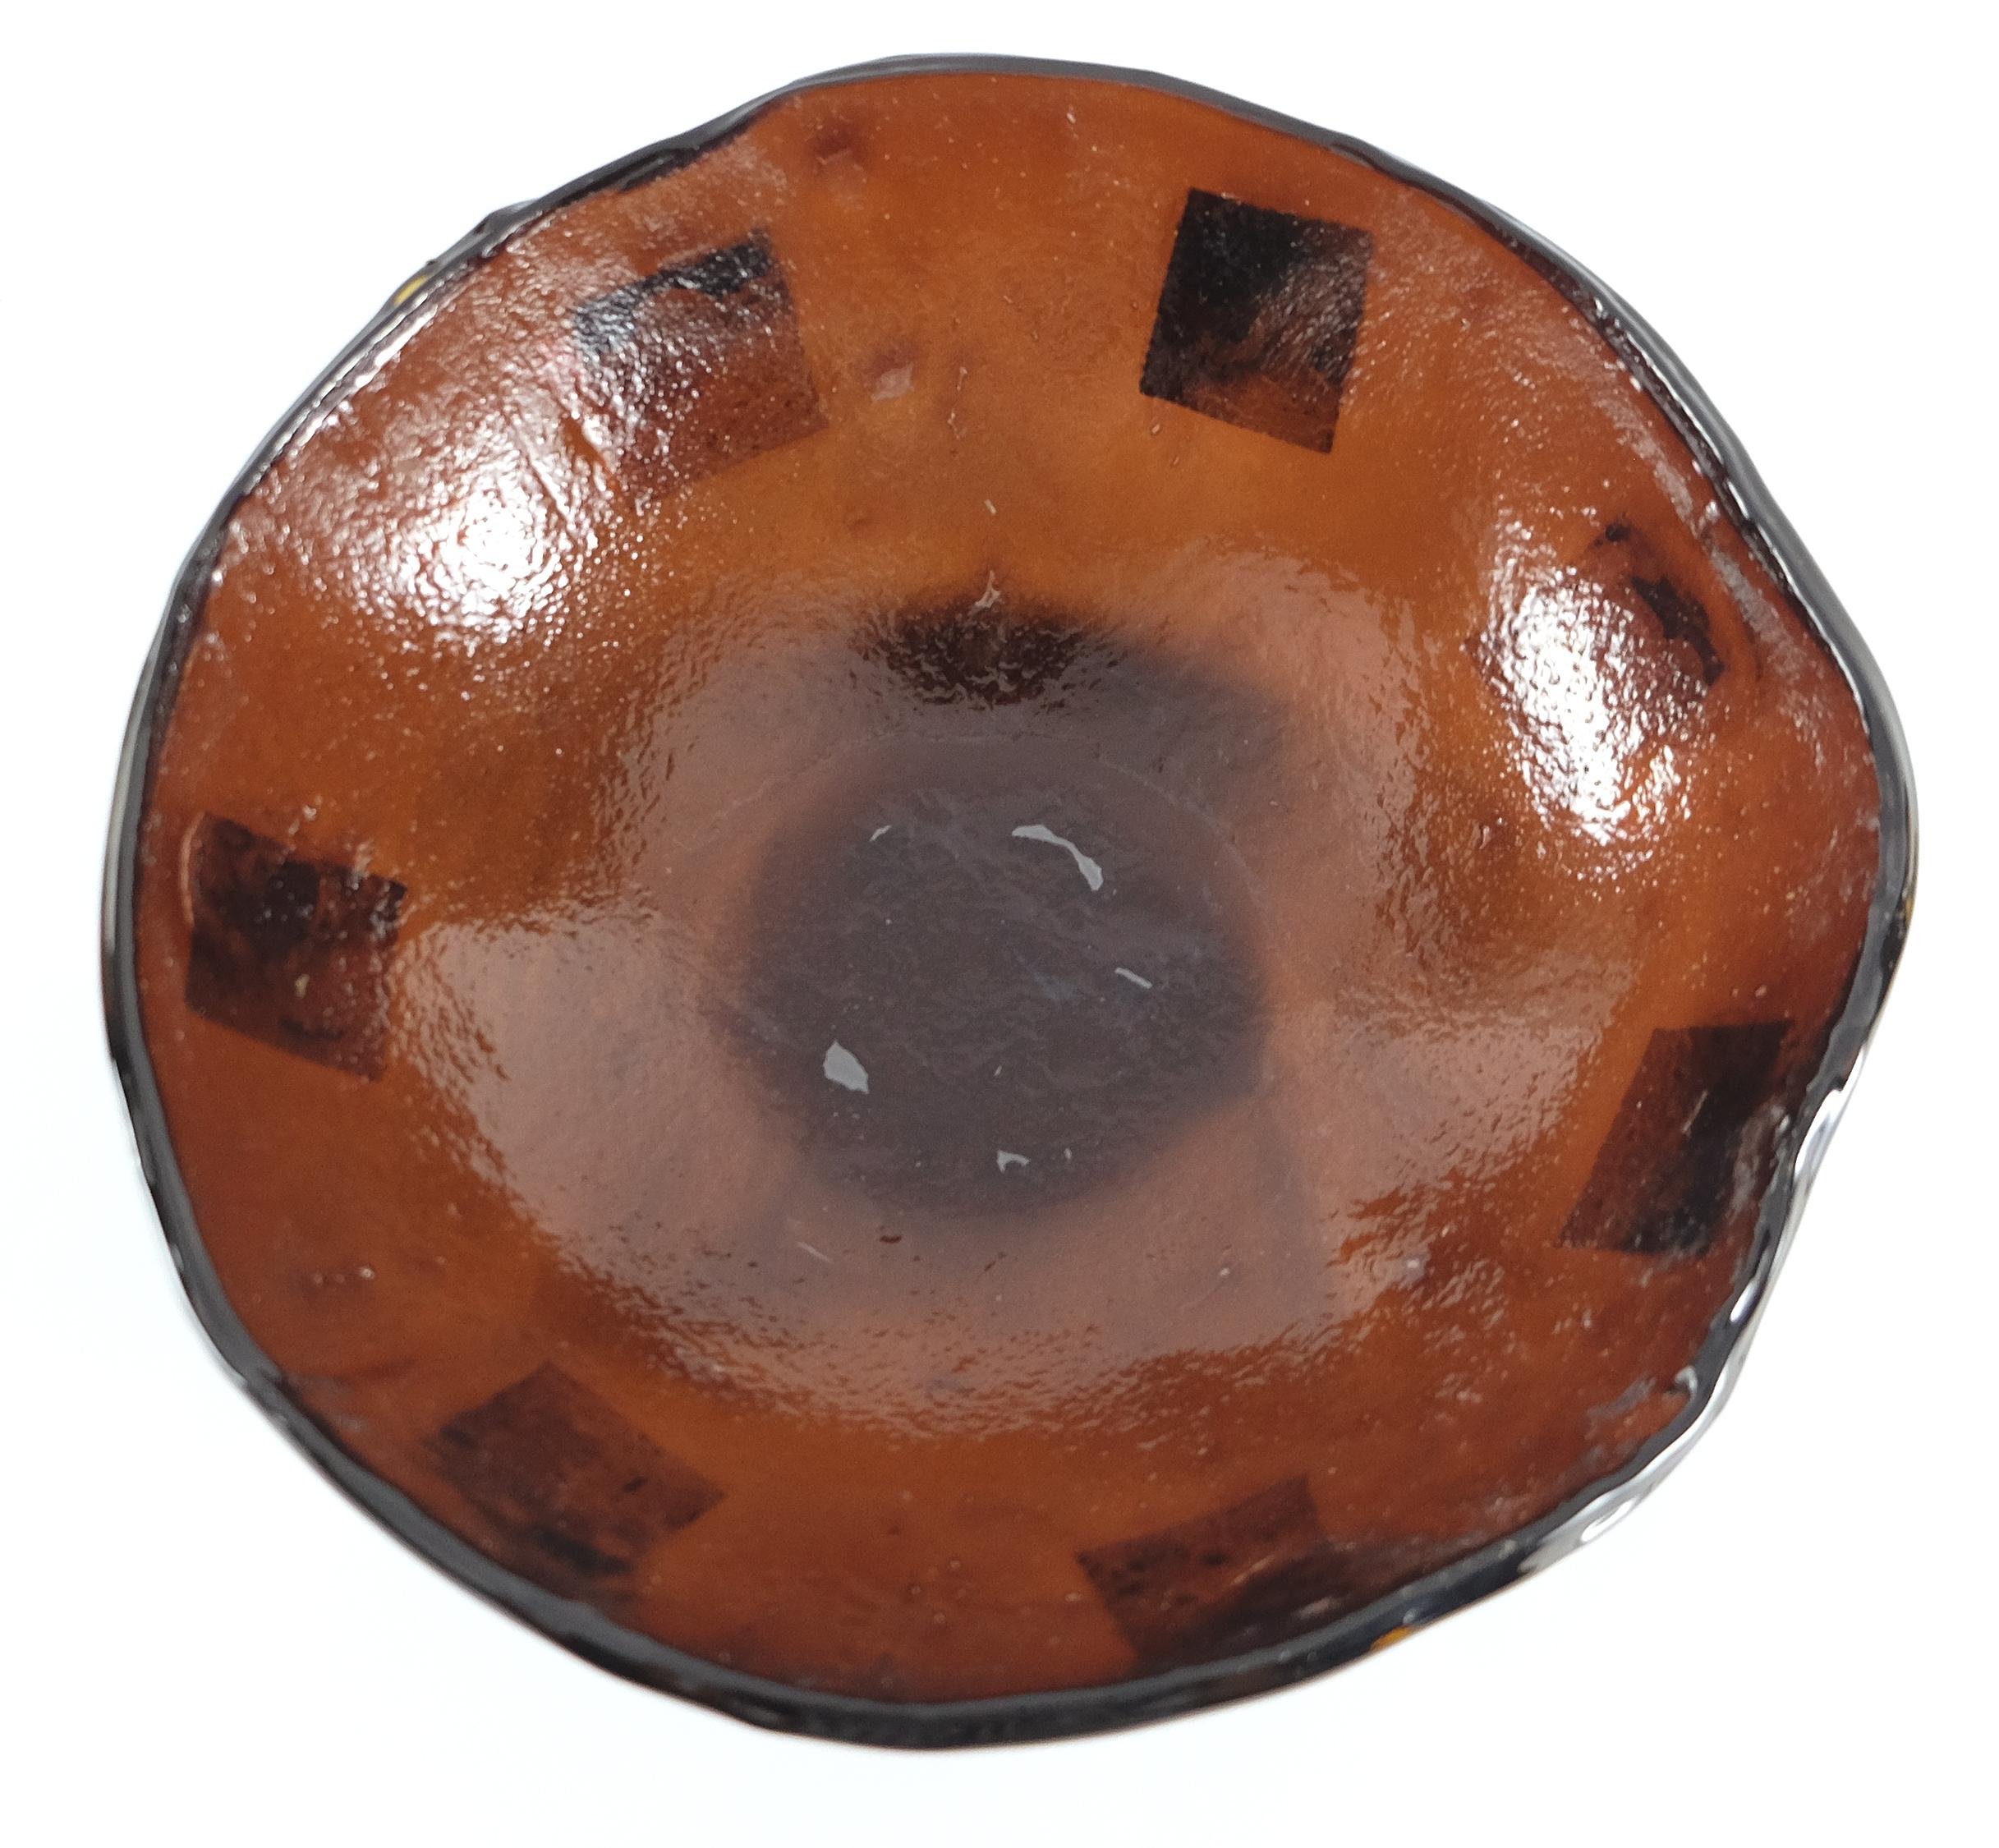 Italian Murano Glass Bowl with Gold Leaf Accents

Offered for sale is an Italian handblown brown Murano glass bowl created with subtle textures and infused gold leaf accents.

 